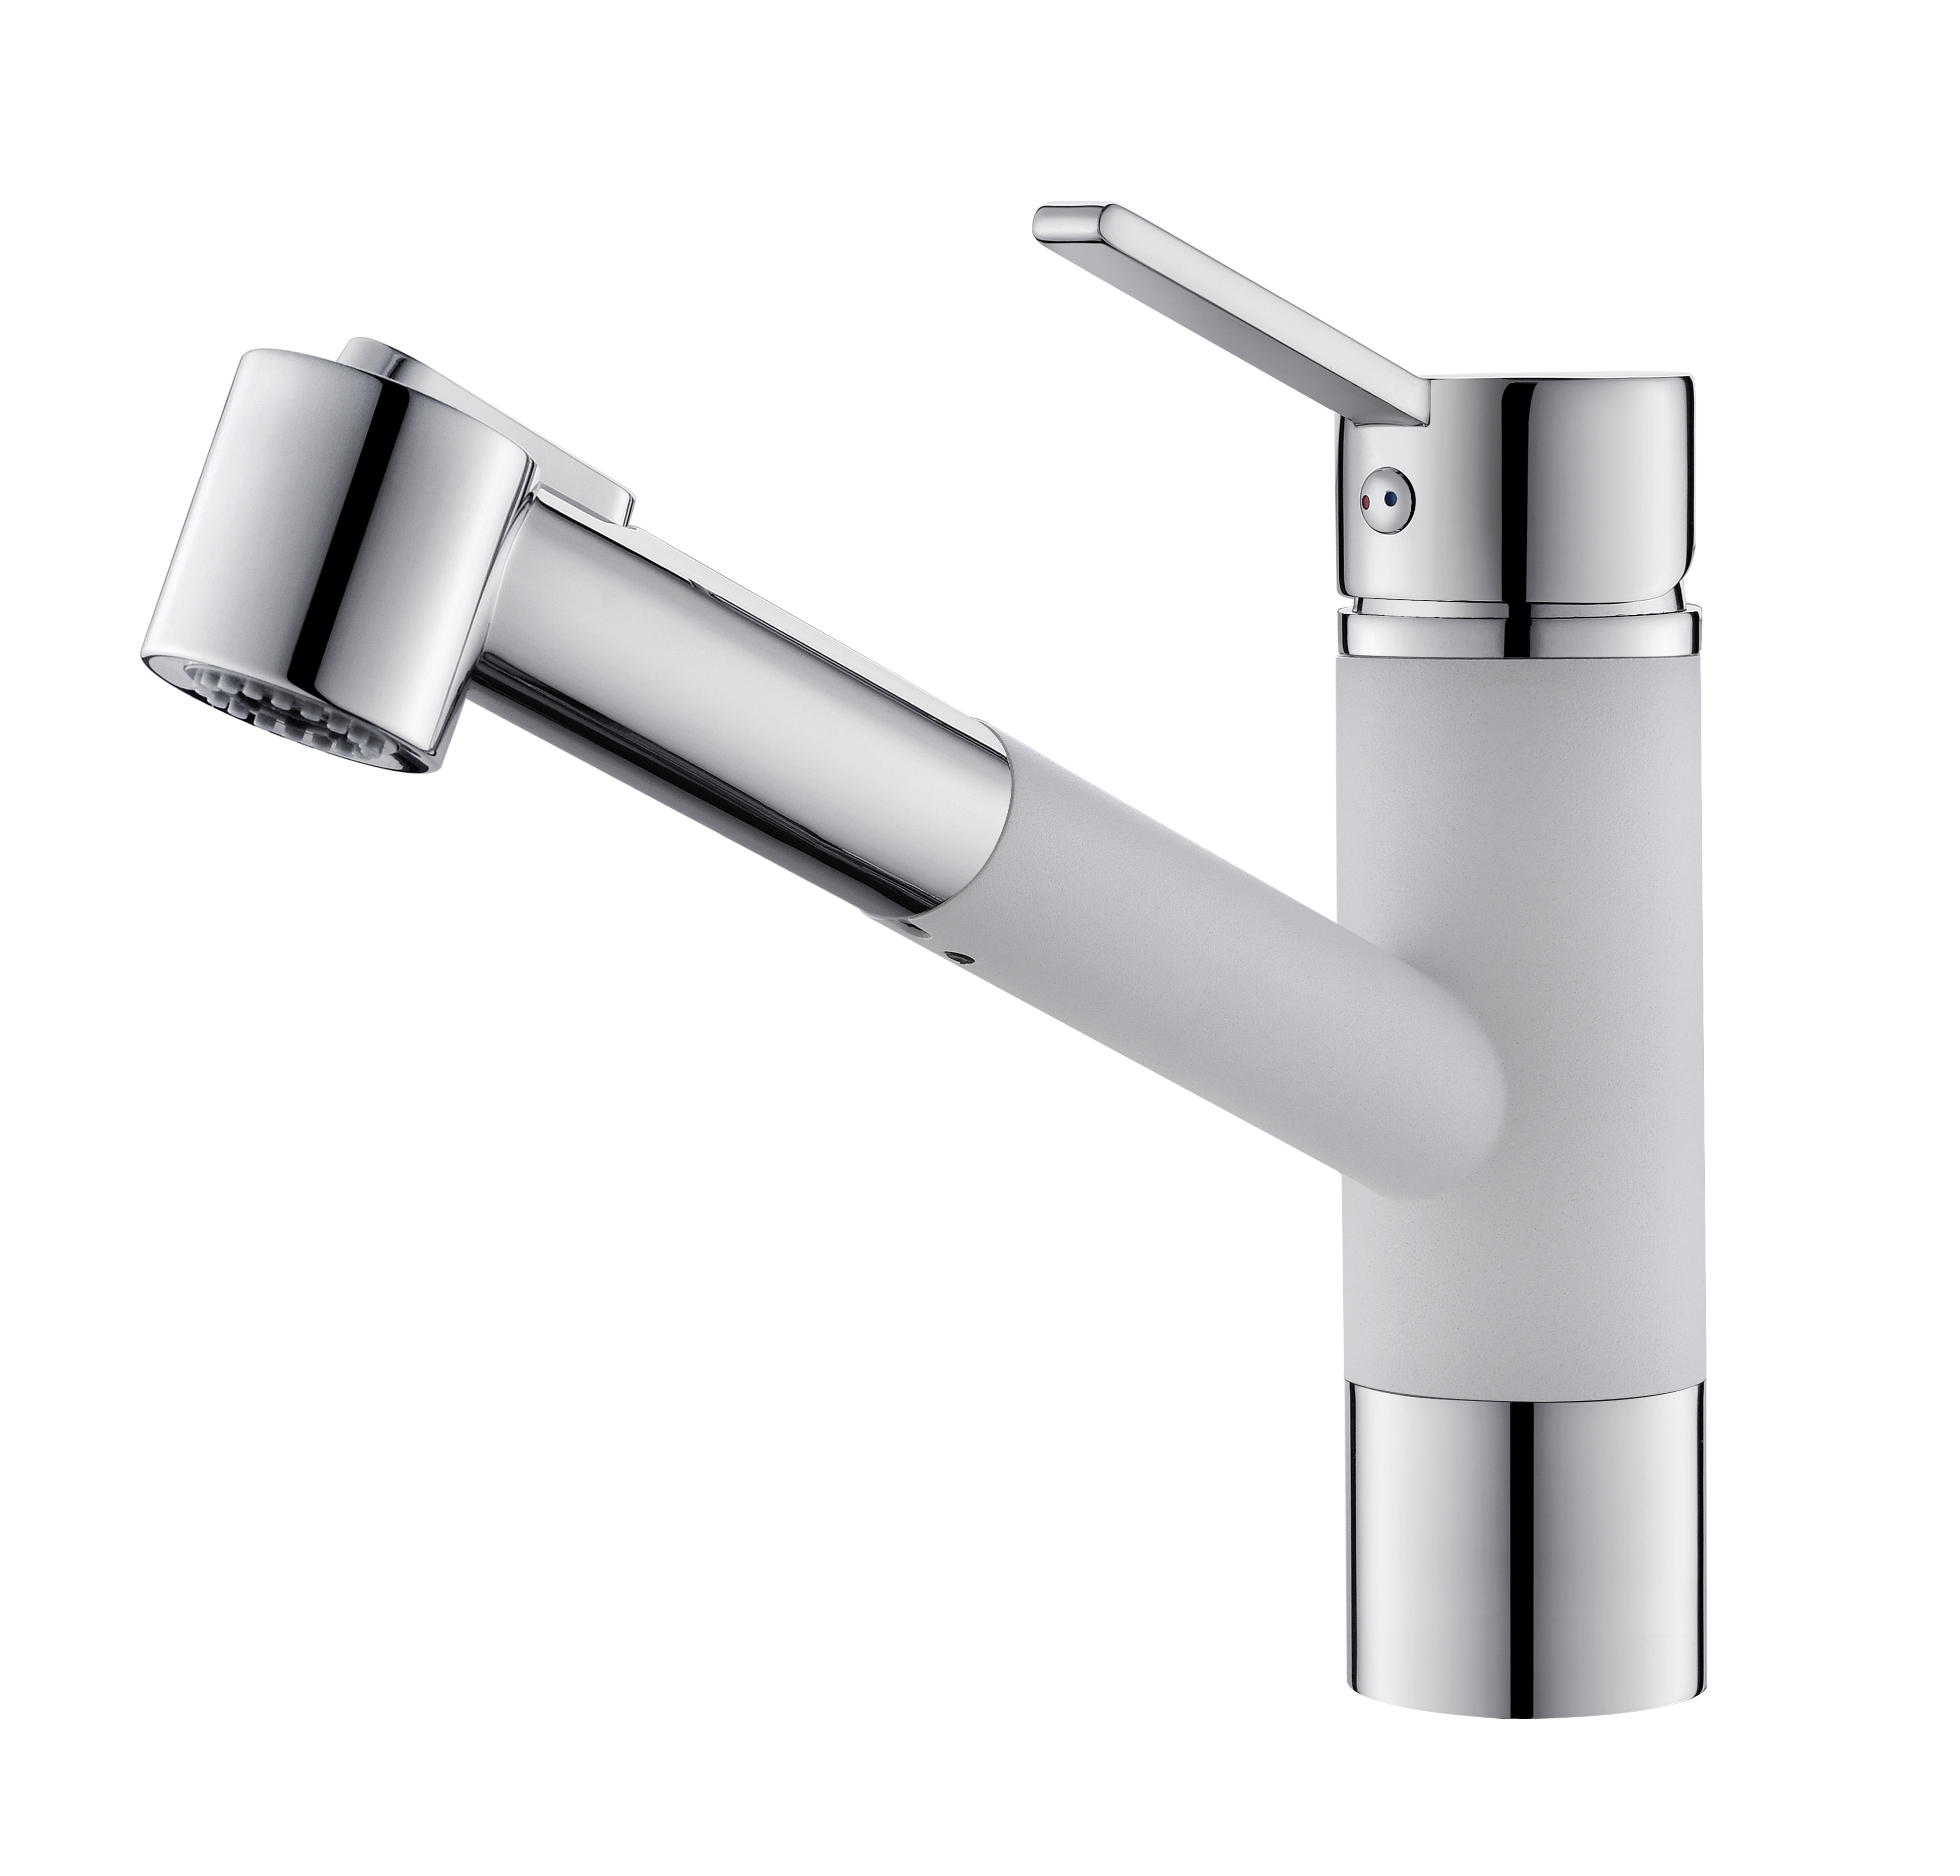 Cold/Hot Water Faucet Kitchen Faucet With Pull Out Sprayer Function Kitchen Faucet